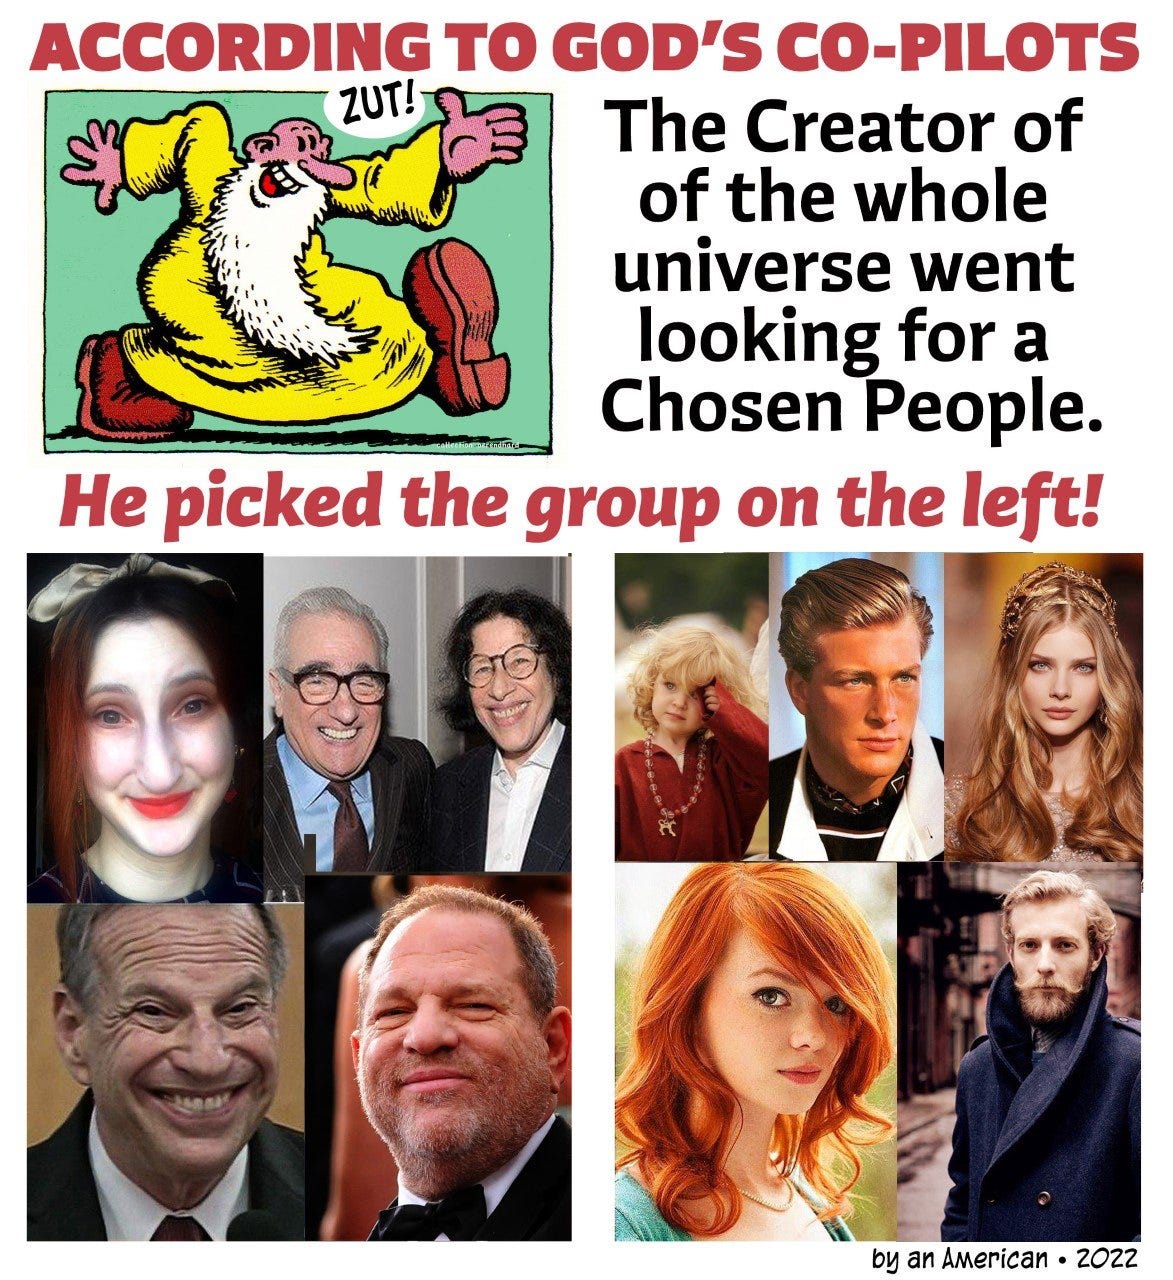 May be an image of 10 people and text that says 'ACCORDING TO GOD'S CO-PILOTS ZUT! The Creator of of the whole universe went looking for a Chosen People. He picked the group on the left! American baAmerica. 2022'